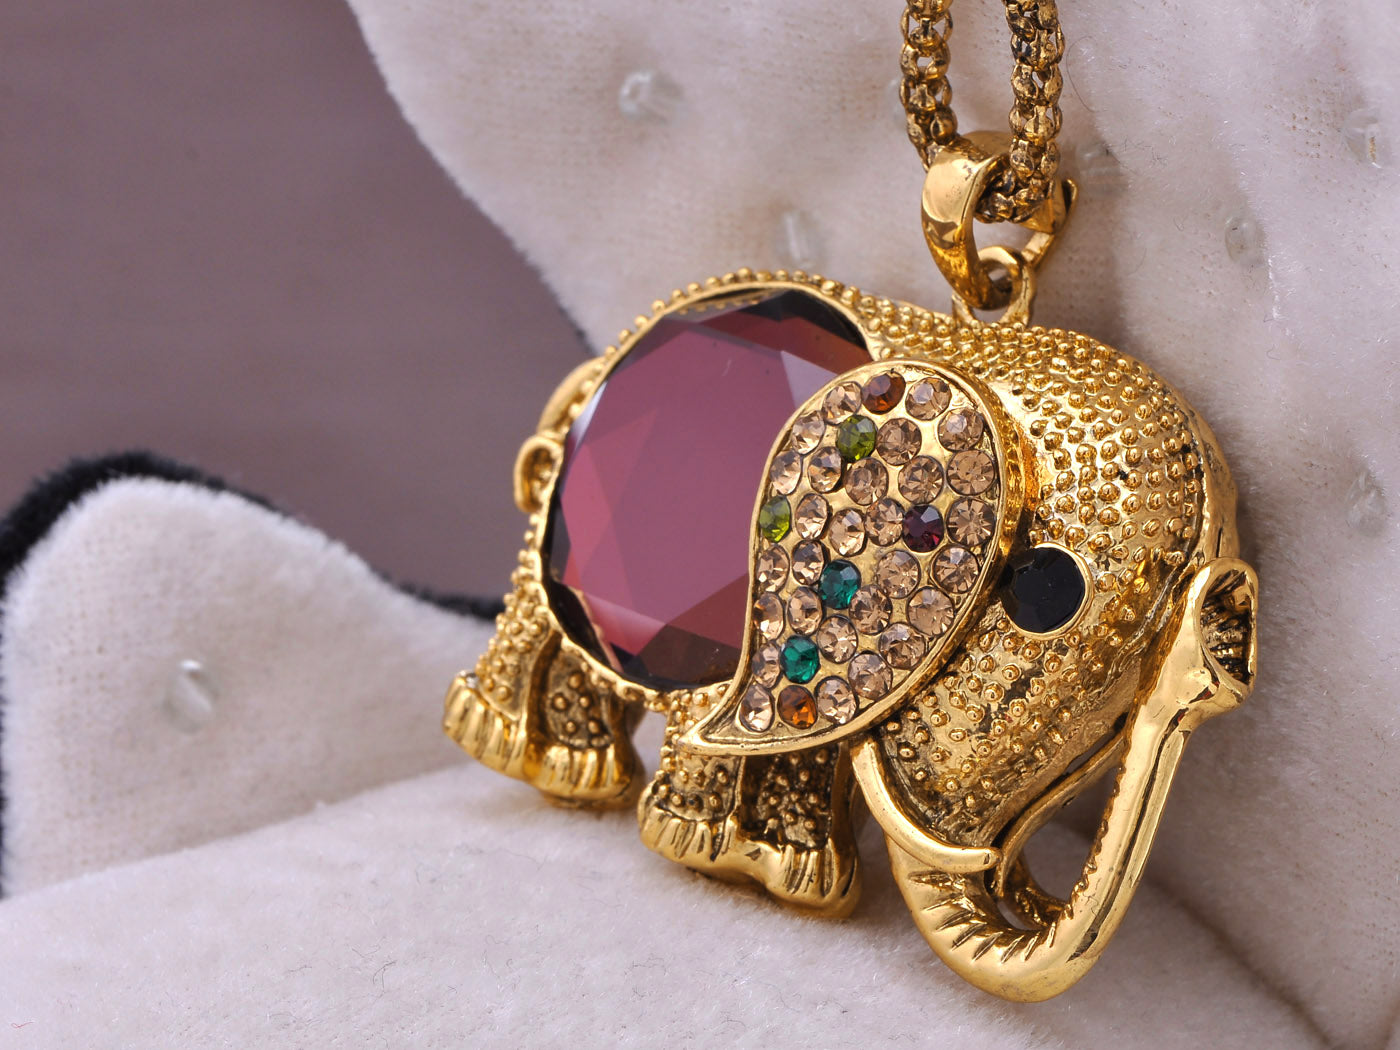 Amethyst Multicolored Studded Elephant Chain Necklace